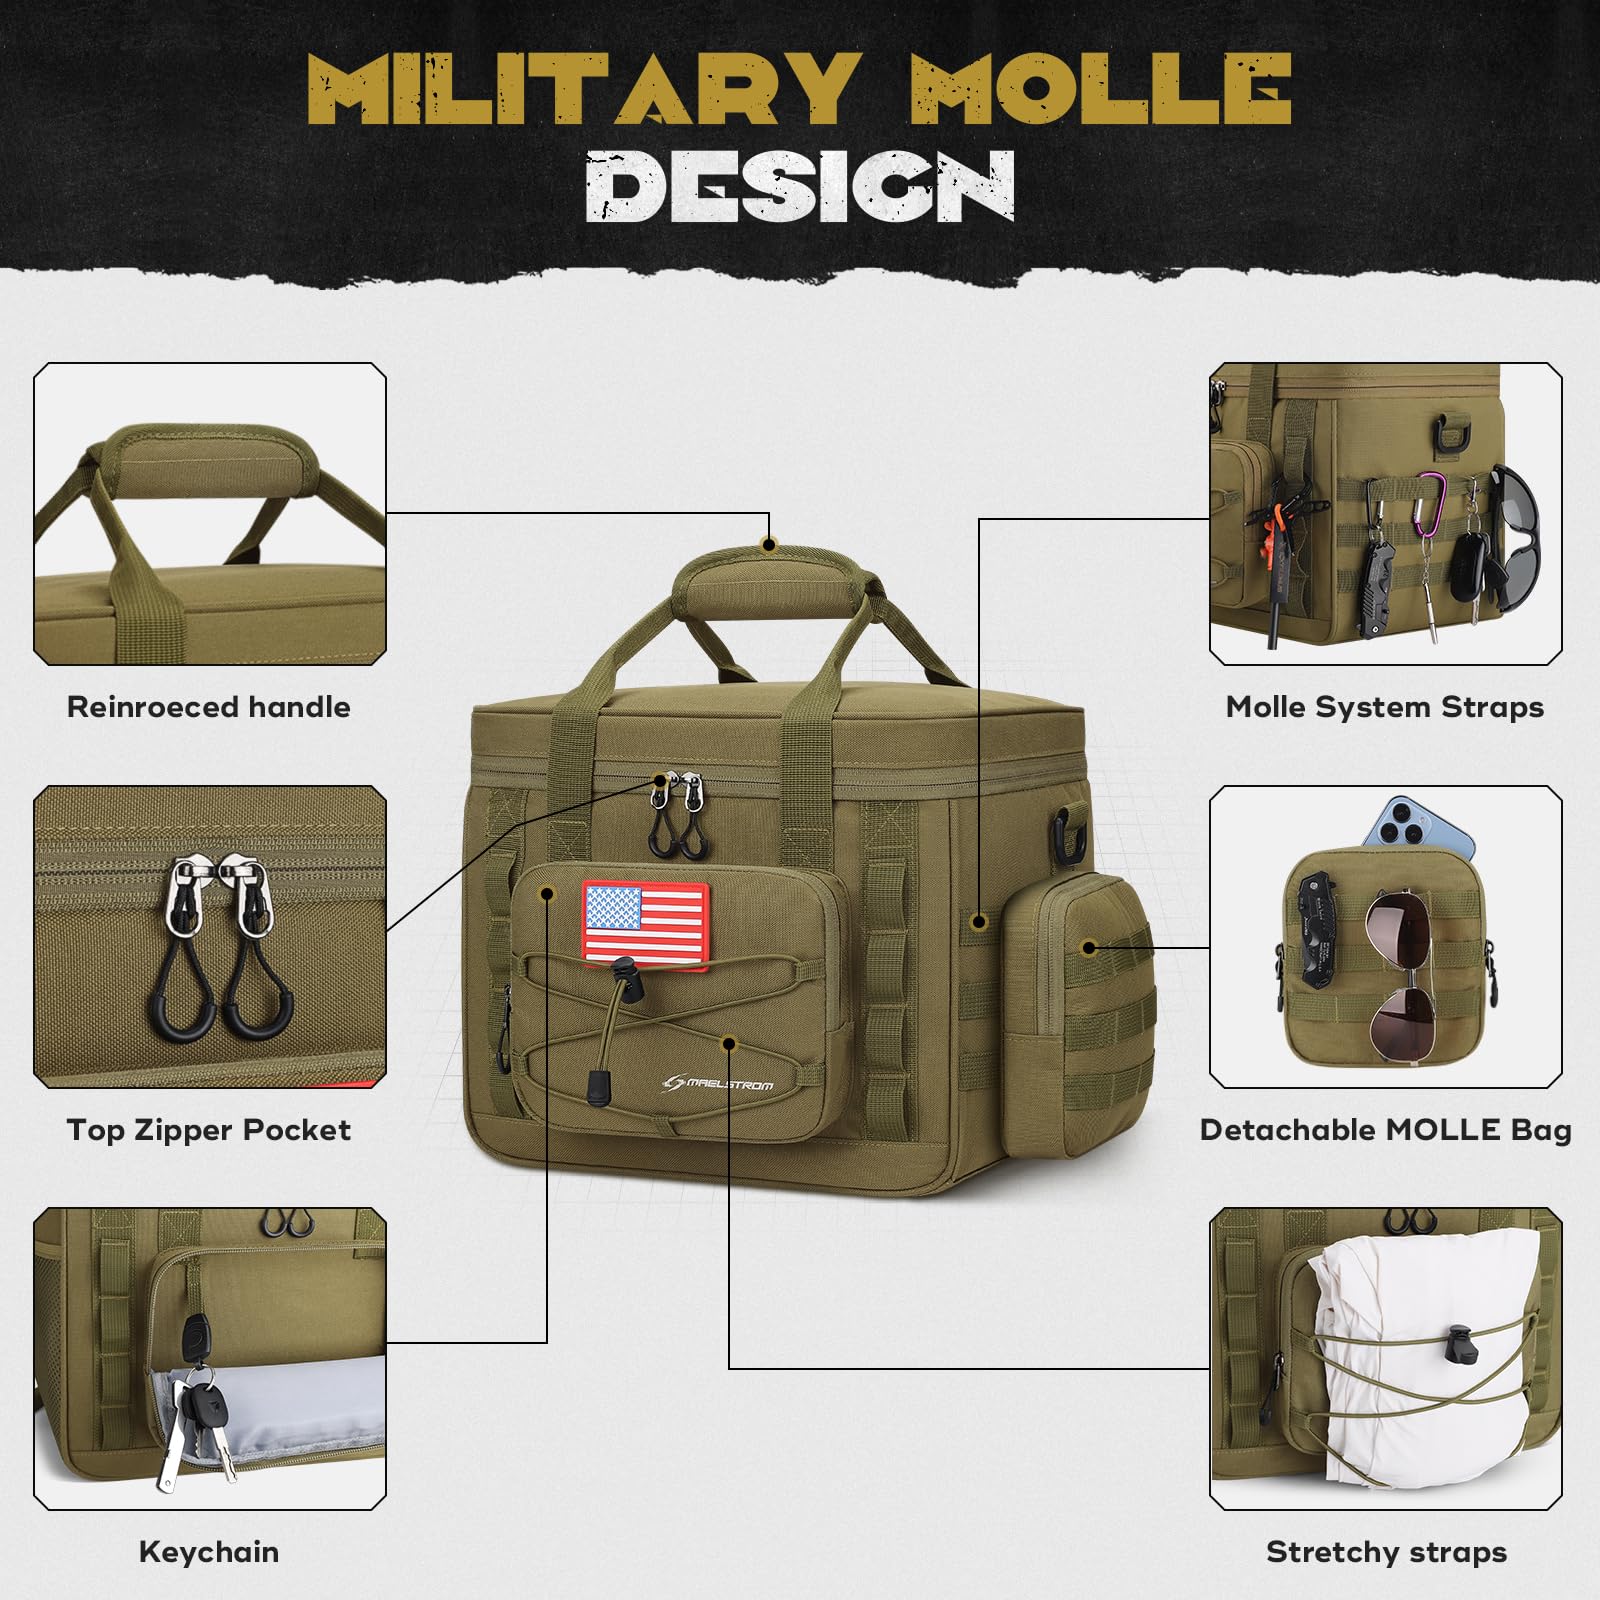 Maelstrom Tactical Lunch Box, Insulated Lunch Bag for Men, Large Durable Leakproof Cooler Bag with Detachable MOLLE Bags, Modern Lunch Tote for Adult Women Work,Picnic,20 Cans/15 L, Khaki